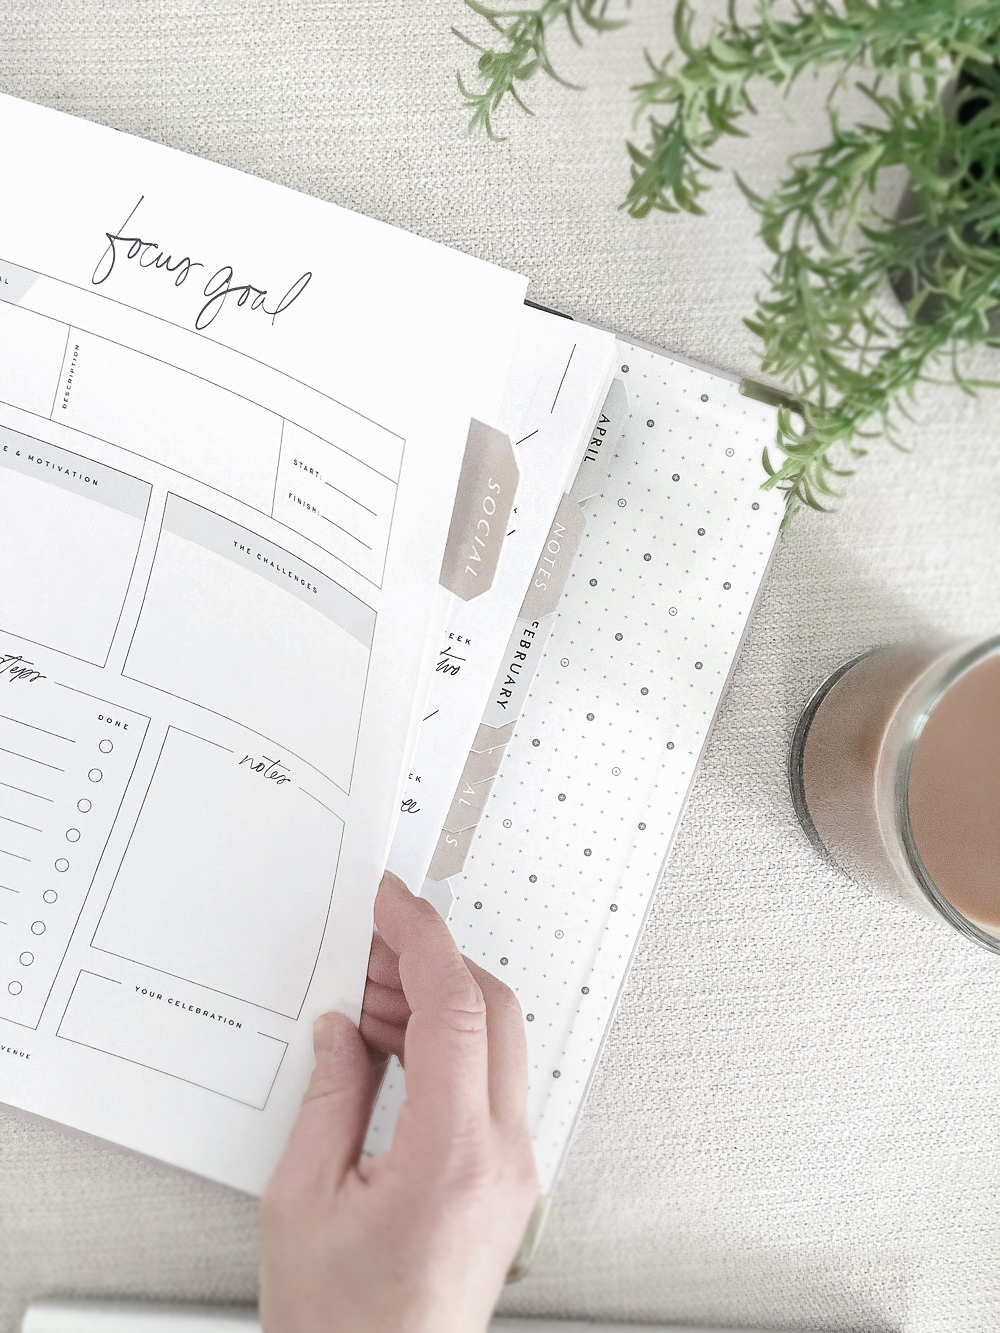 Organize Your Planner